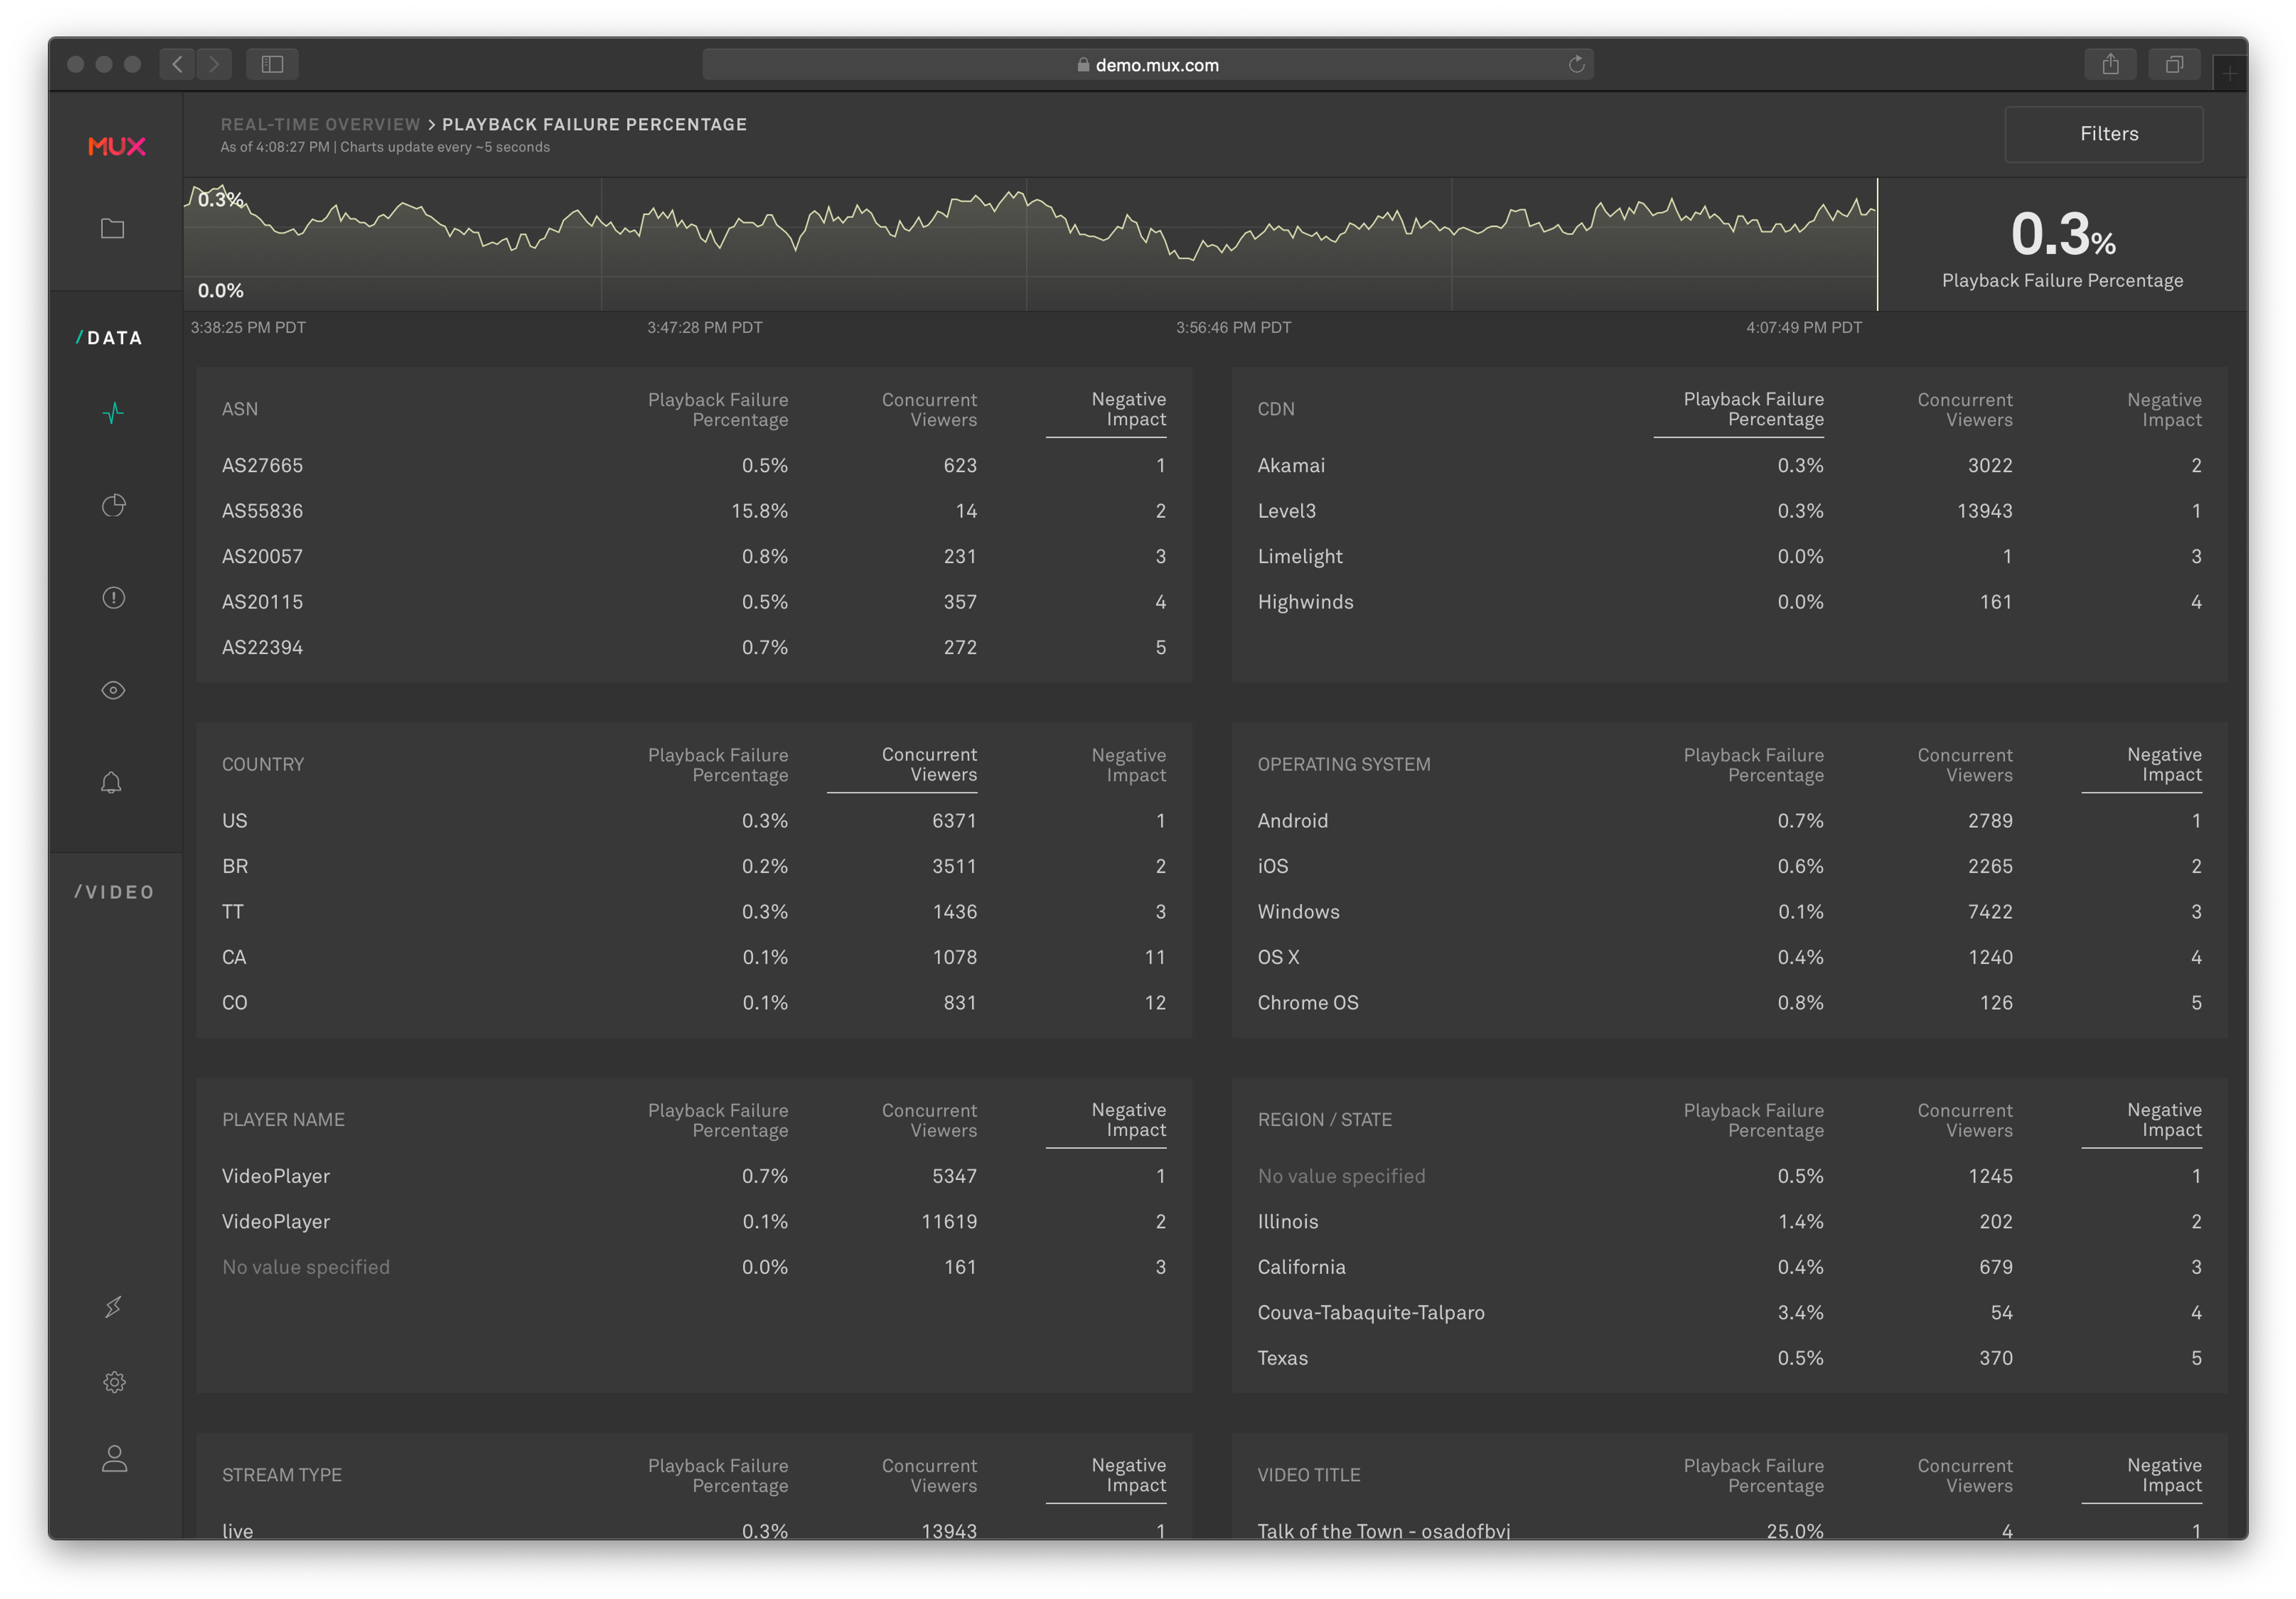 An image of the real-time overview dashboard